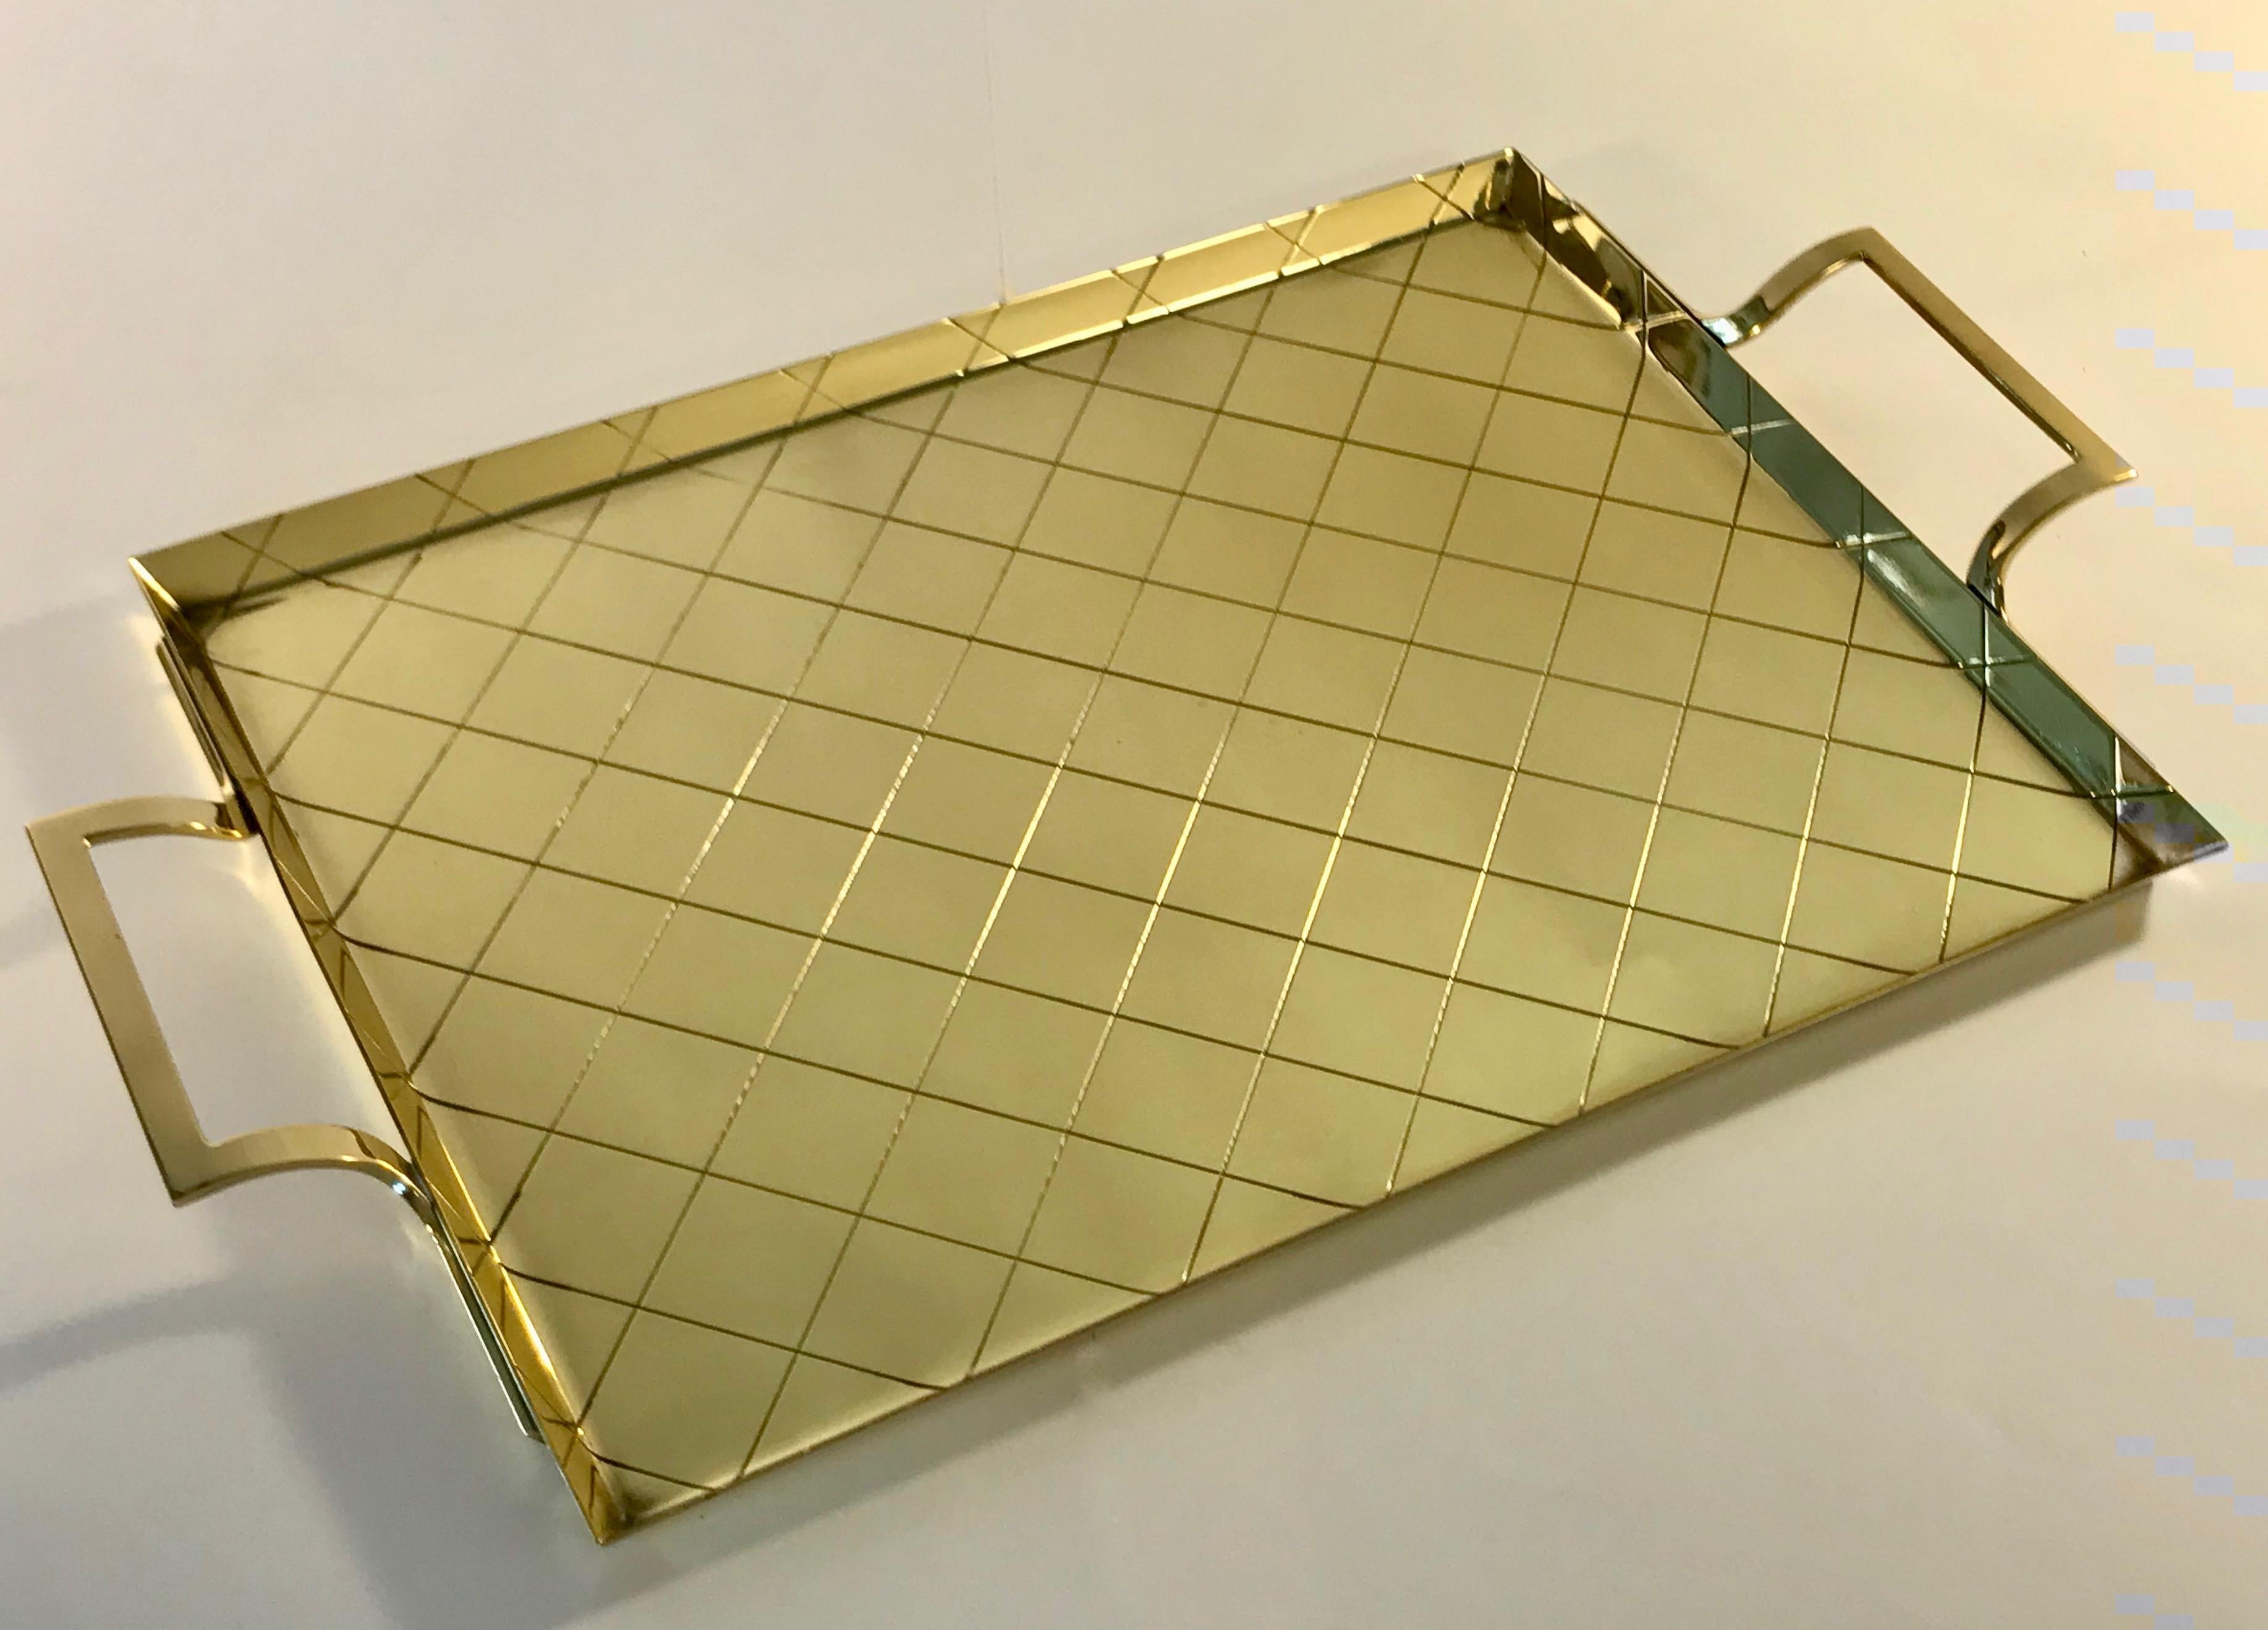 Rectangular brass tray with upswept brass handles and incised diamond or crosshatch pattern designed by Tommi Parzinger and manufactured in New York by Dorlyn Silversmiths.

Measures: 11